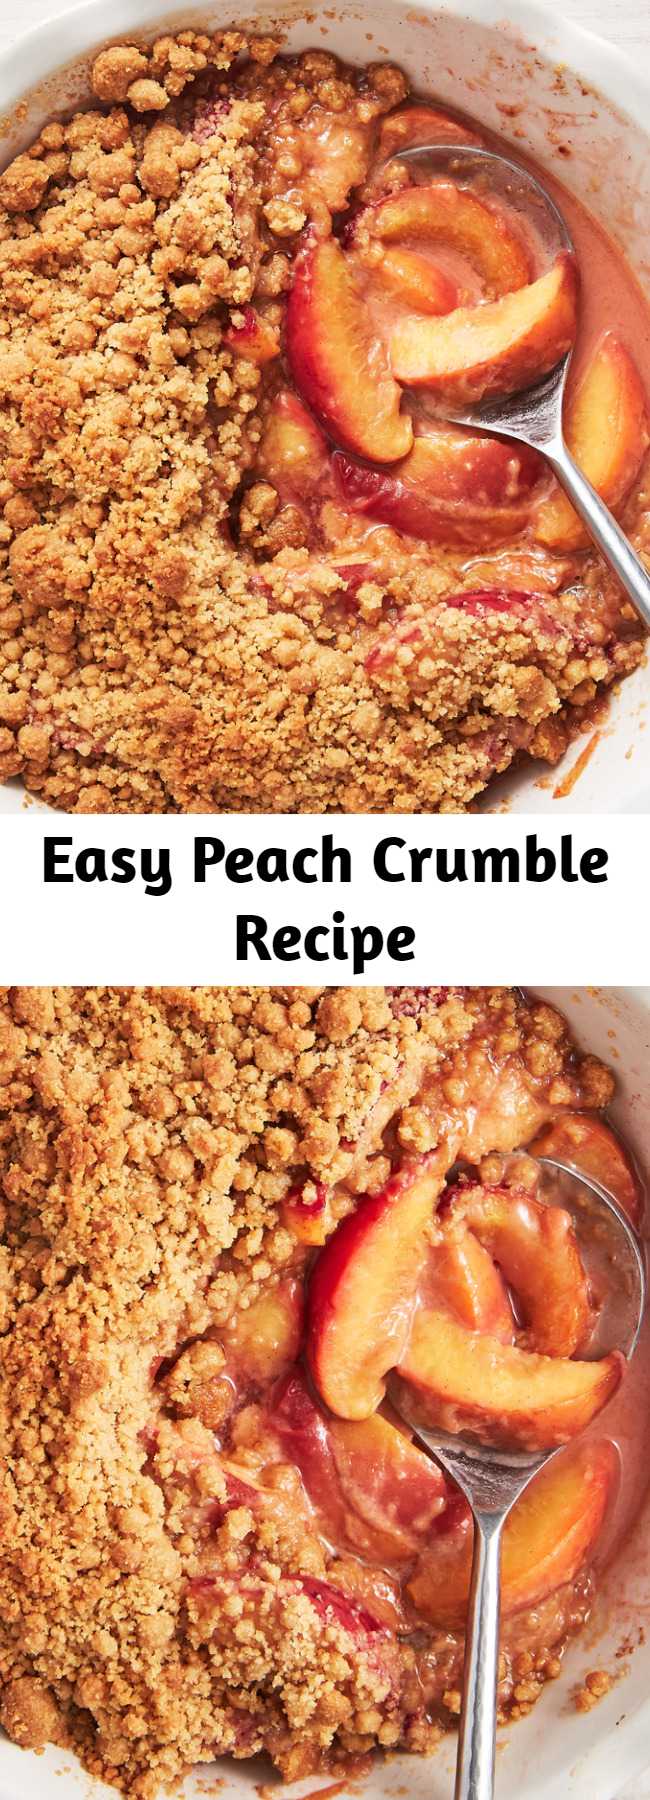 Easy Peach Crumble Recipe - This simple Peach Crumble from Delish.com makes the most of what the summer season has to offer: a little cinnamon and ground ginger goes a long, sweet way!